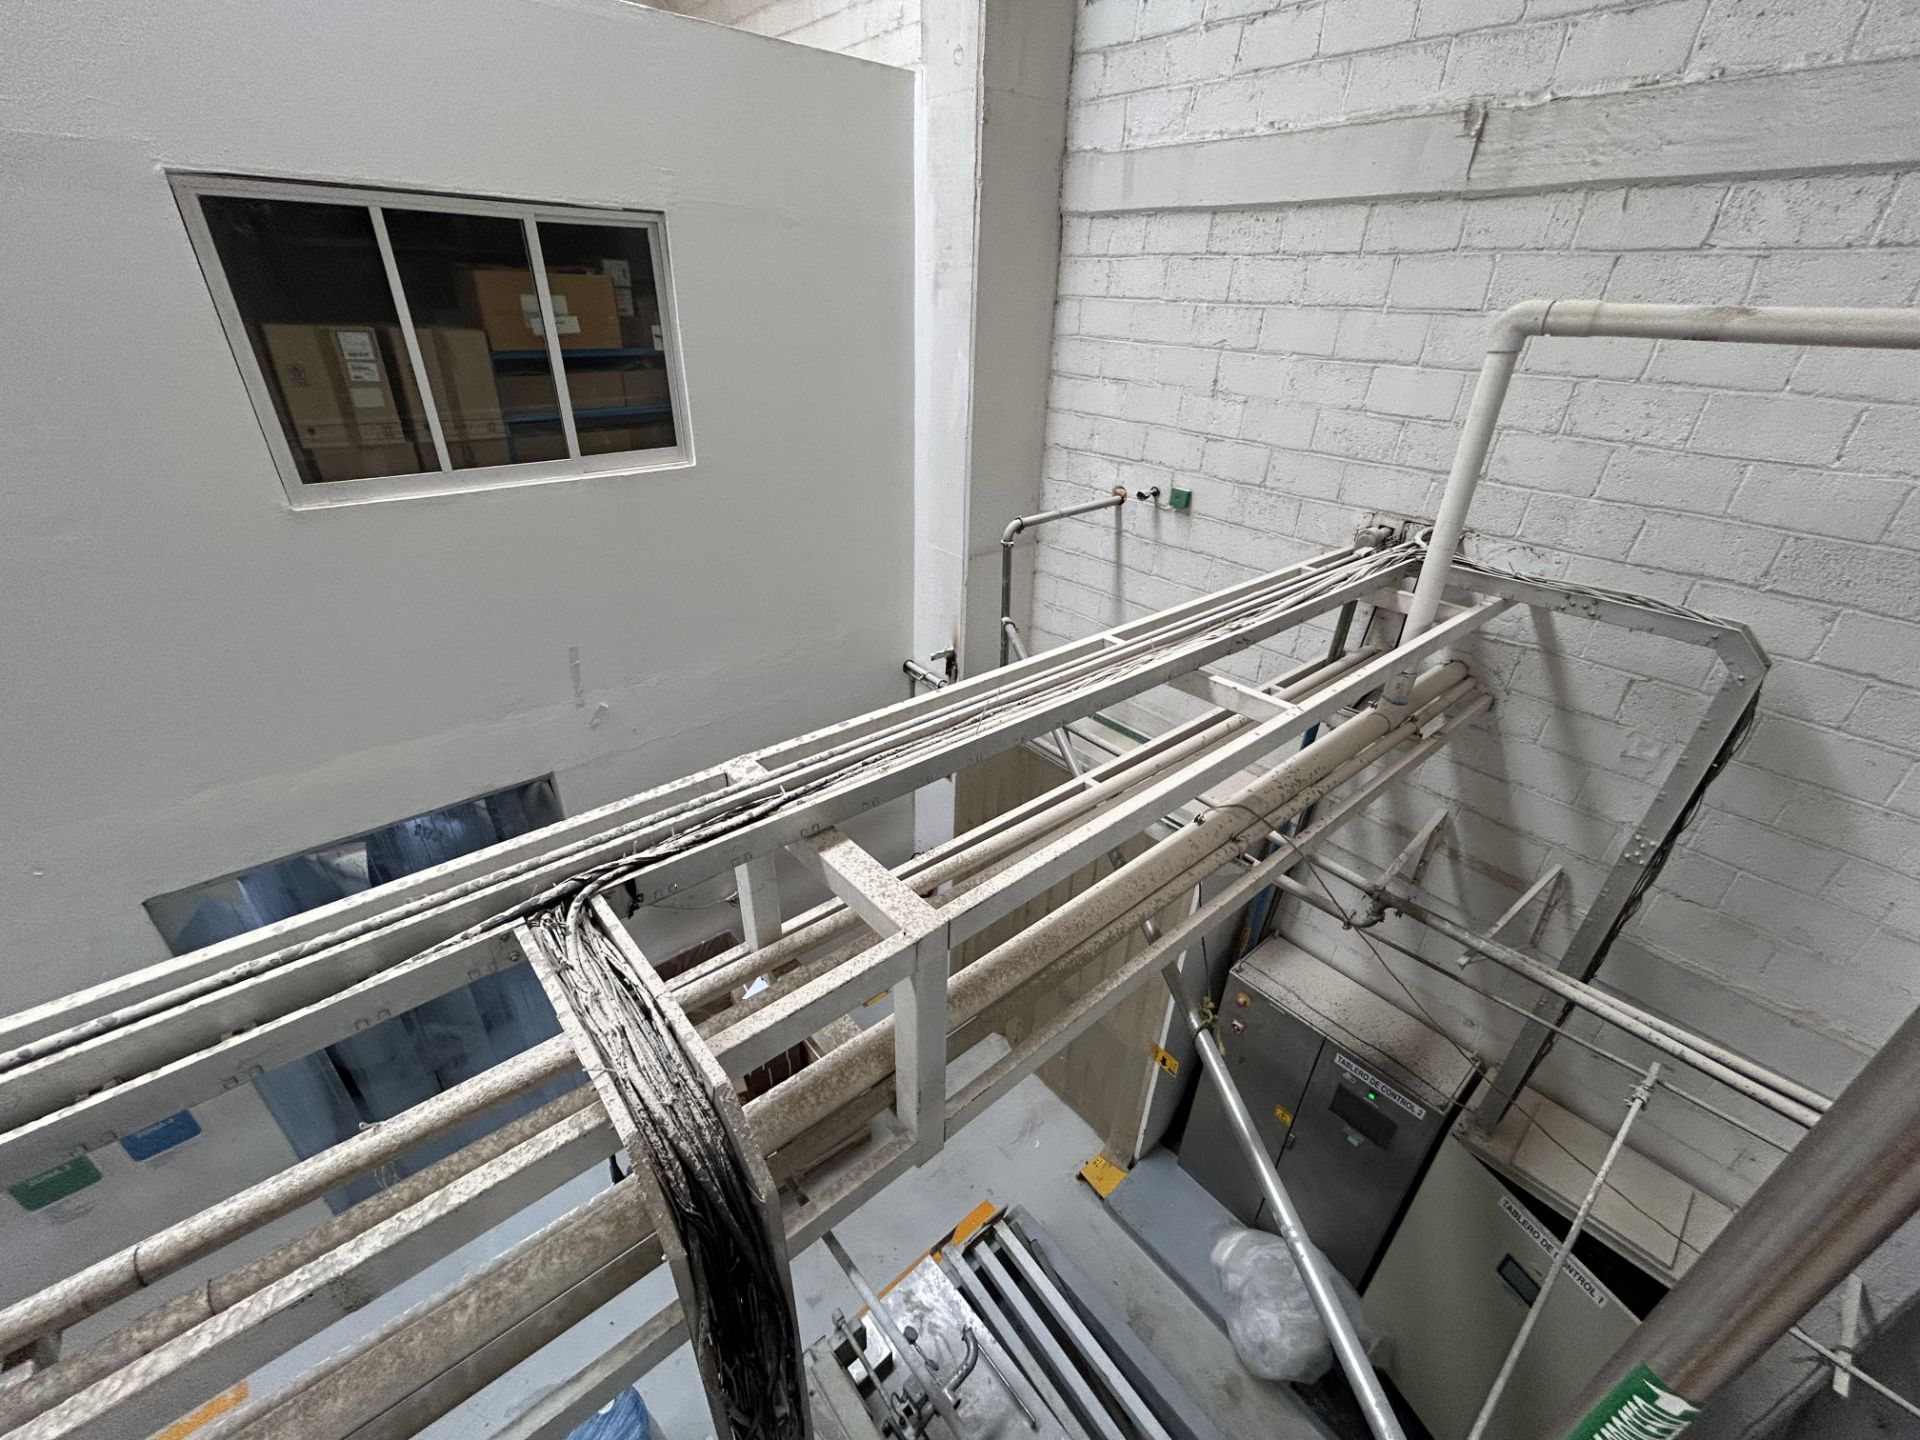 1 IPR Beam Mezzanine Structure measuring approximately 8 x 5.50 x 4.10m, contains: 8 IPR horizontal - Image 9 of 35